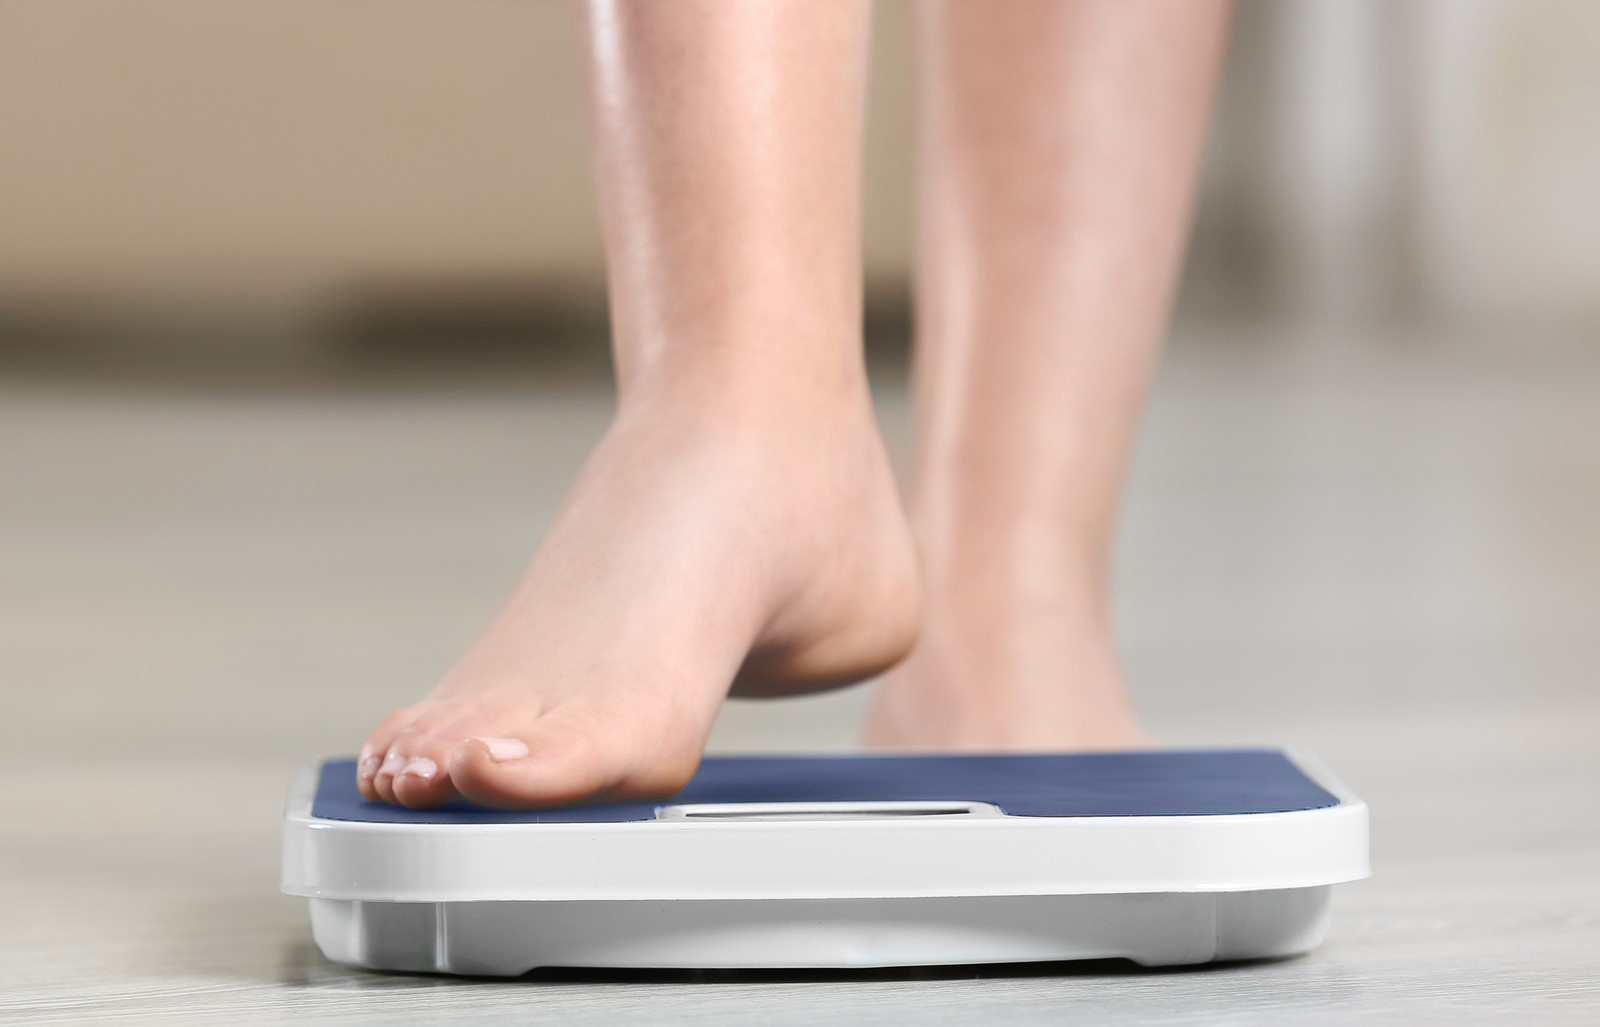 Will you gain weight during menopause?